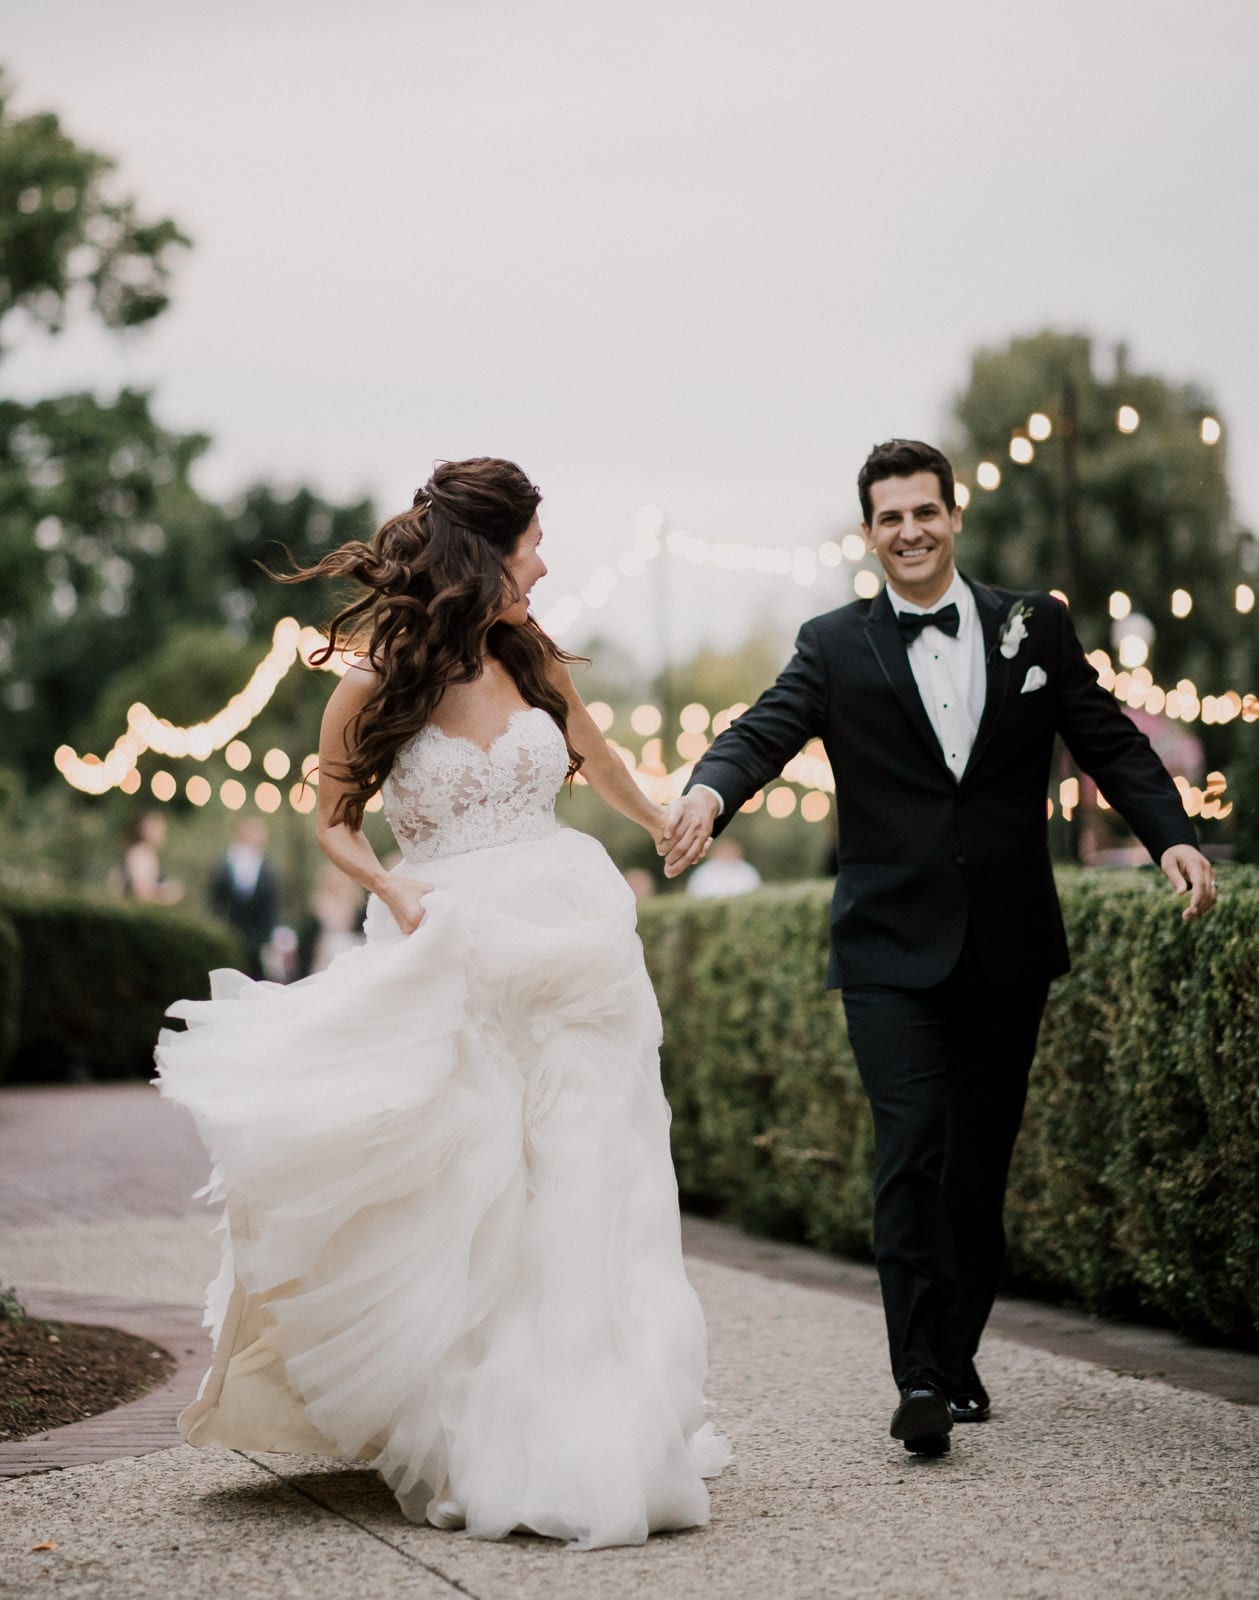 bride and groom portrait at Franklin Park Conservatory Wedding by Columbus Wedding Photographer